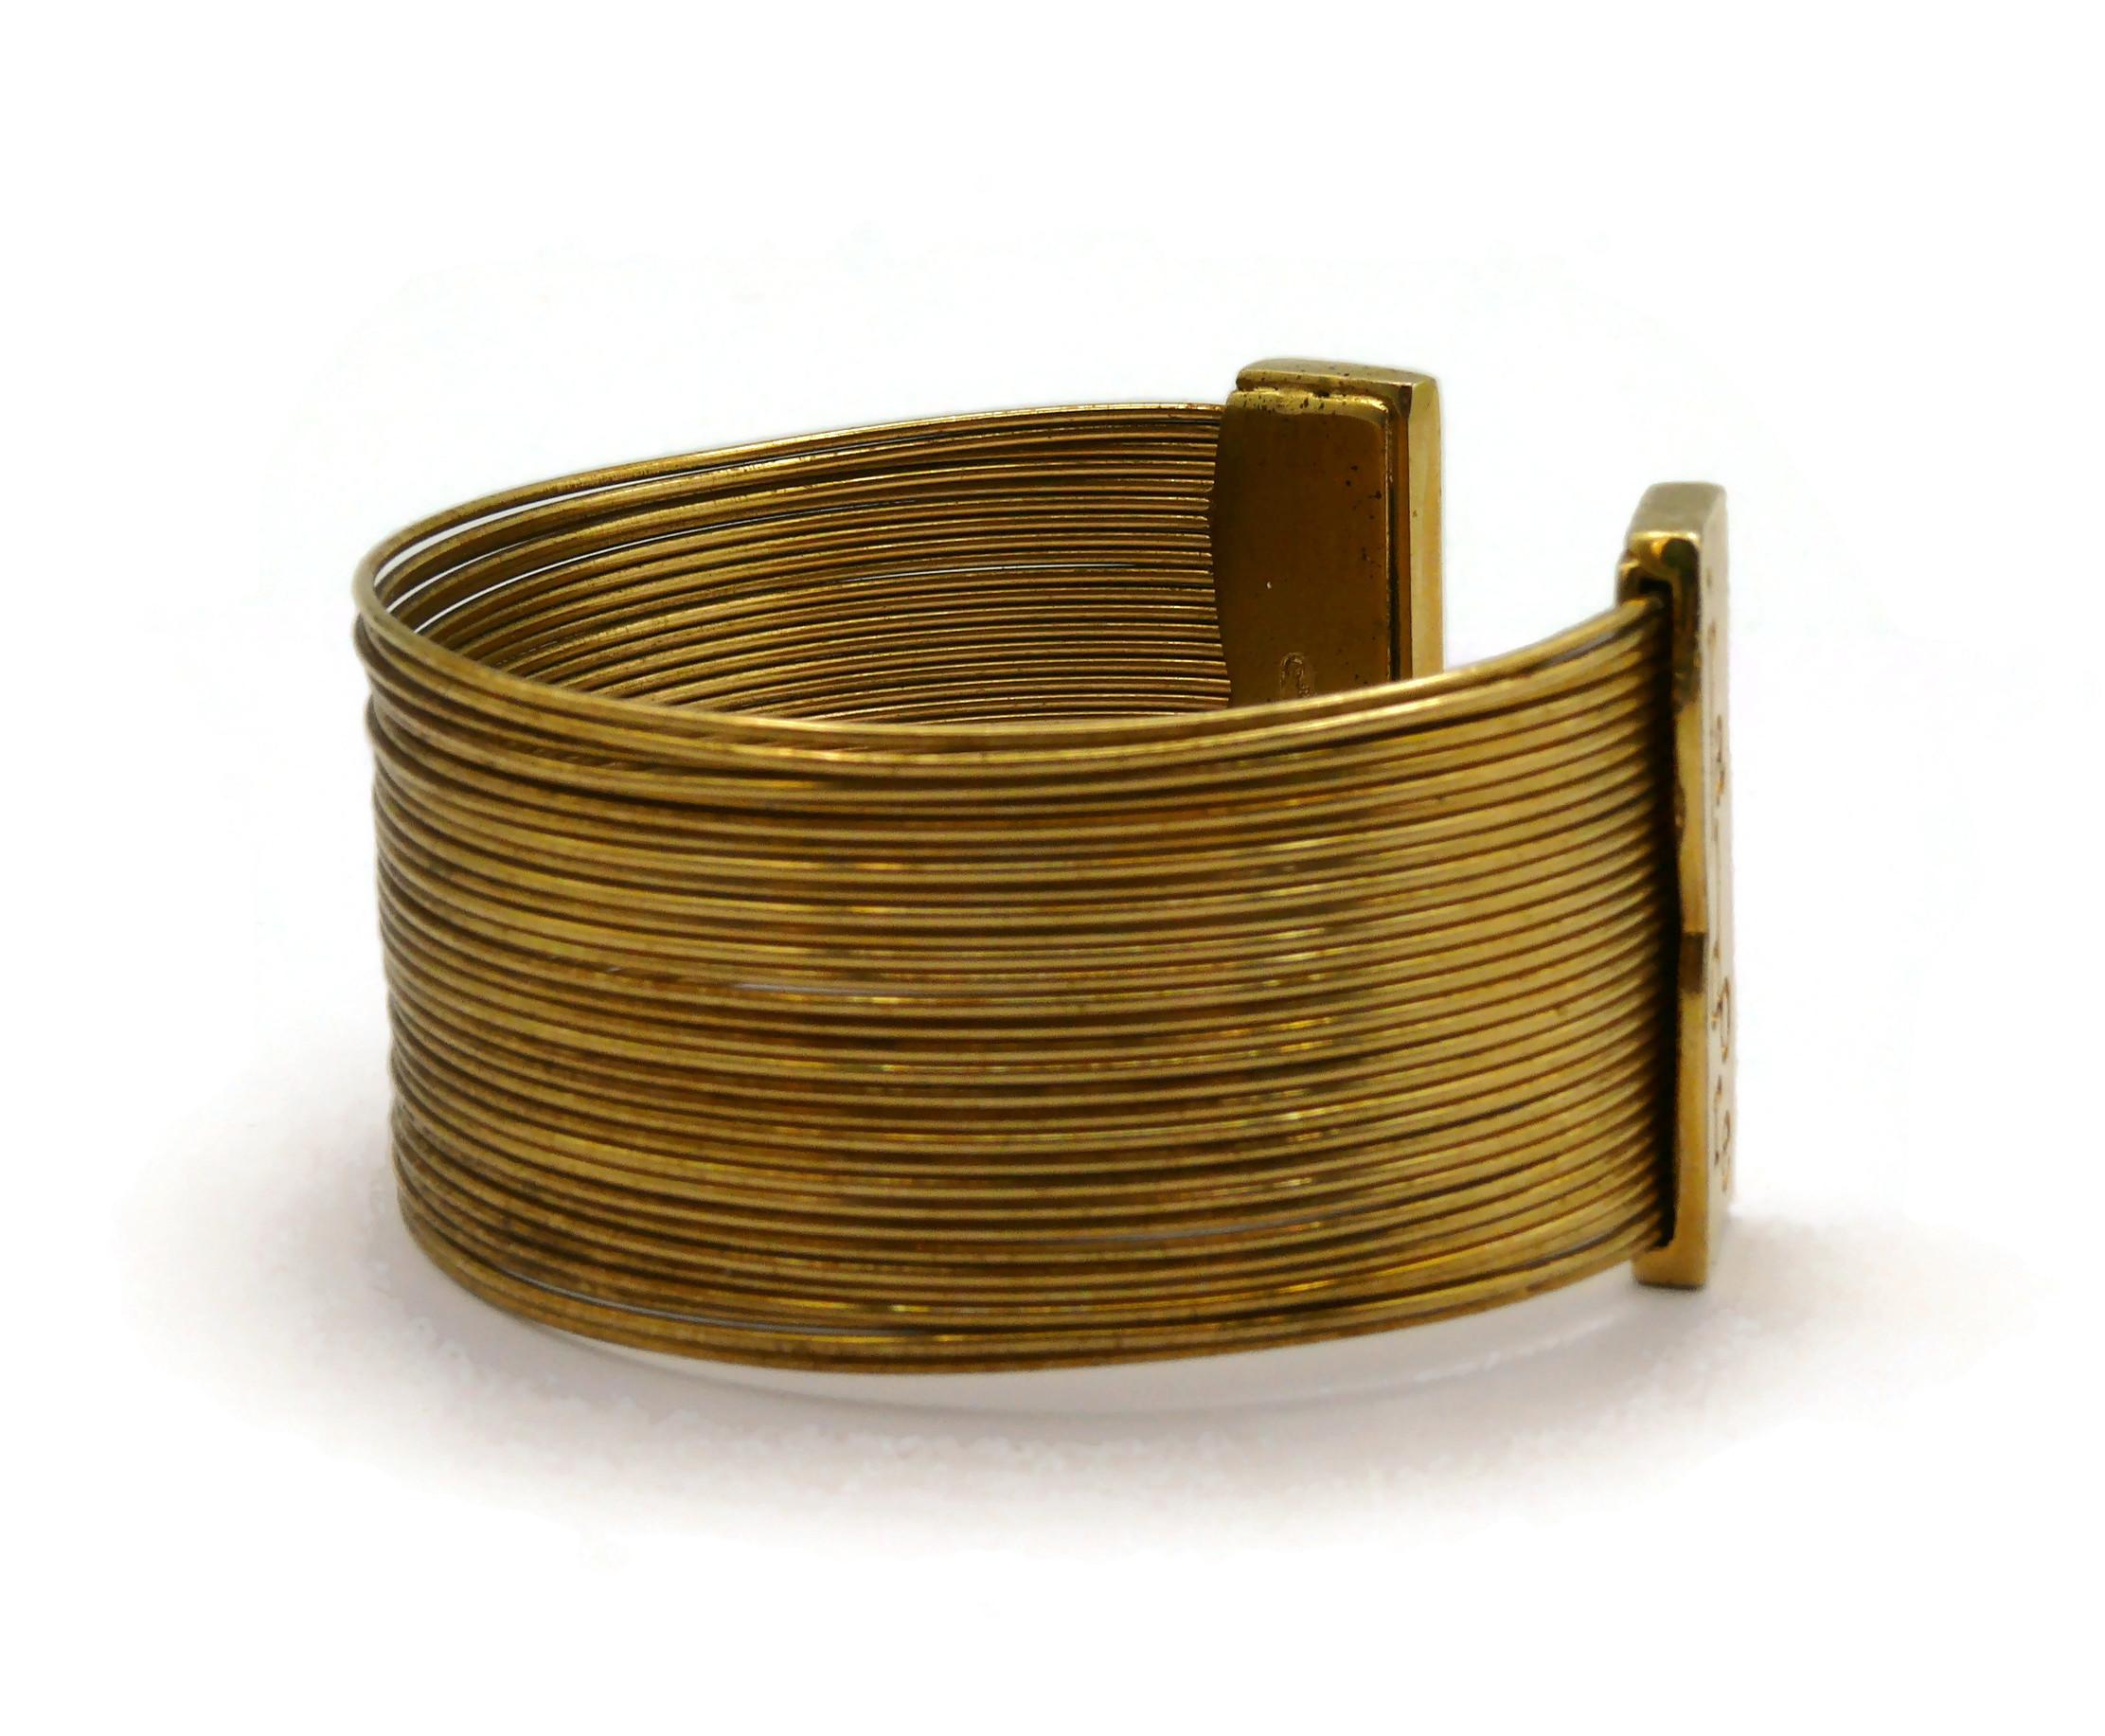 CHRISTIAN DIOR Vintage J'Adore Gold Toned Wire Cuff Bracelet 1